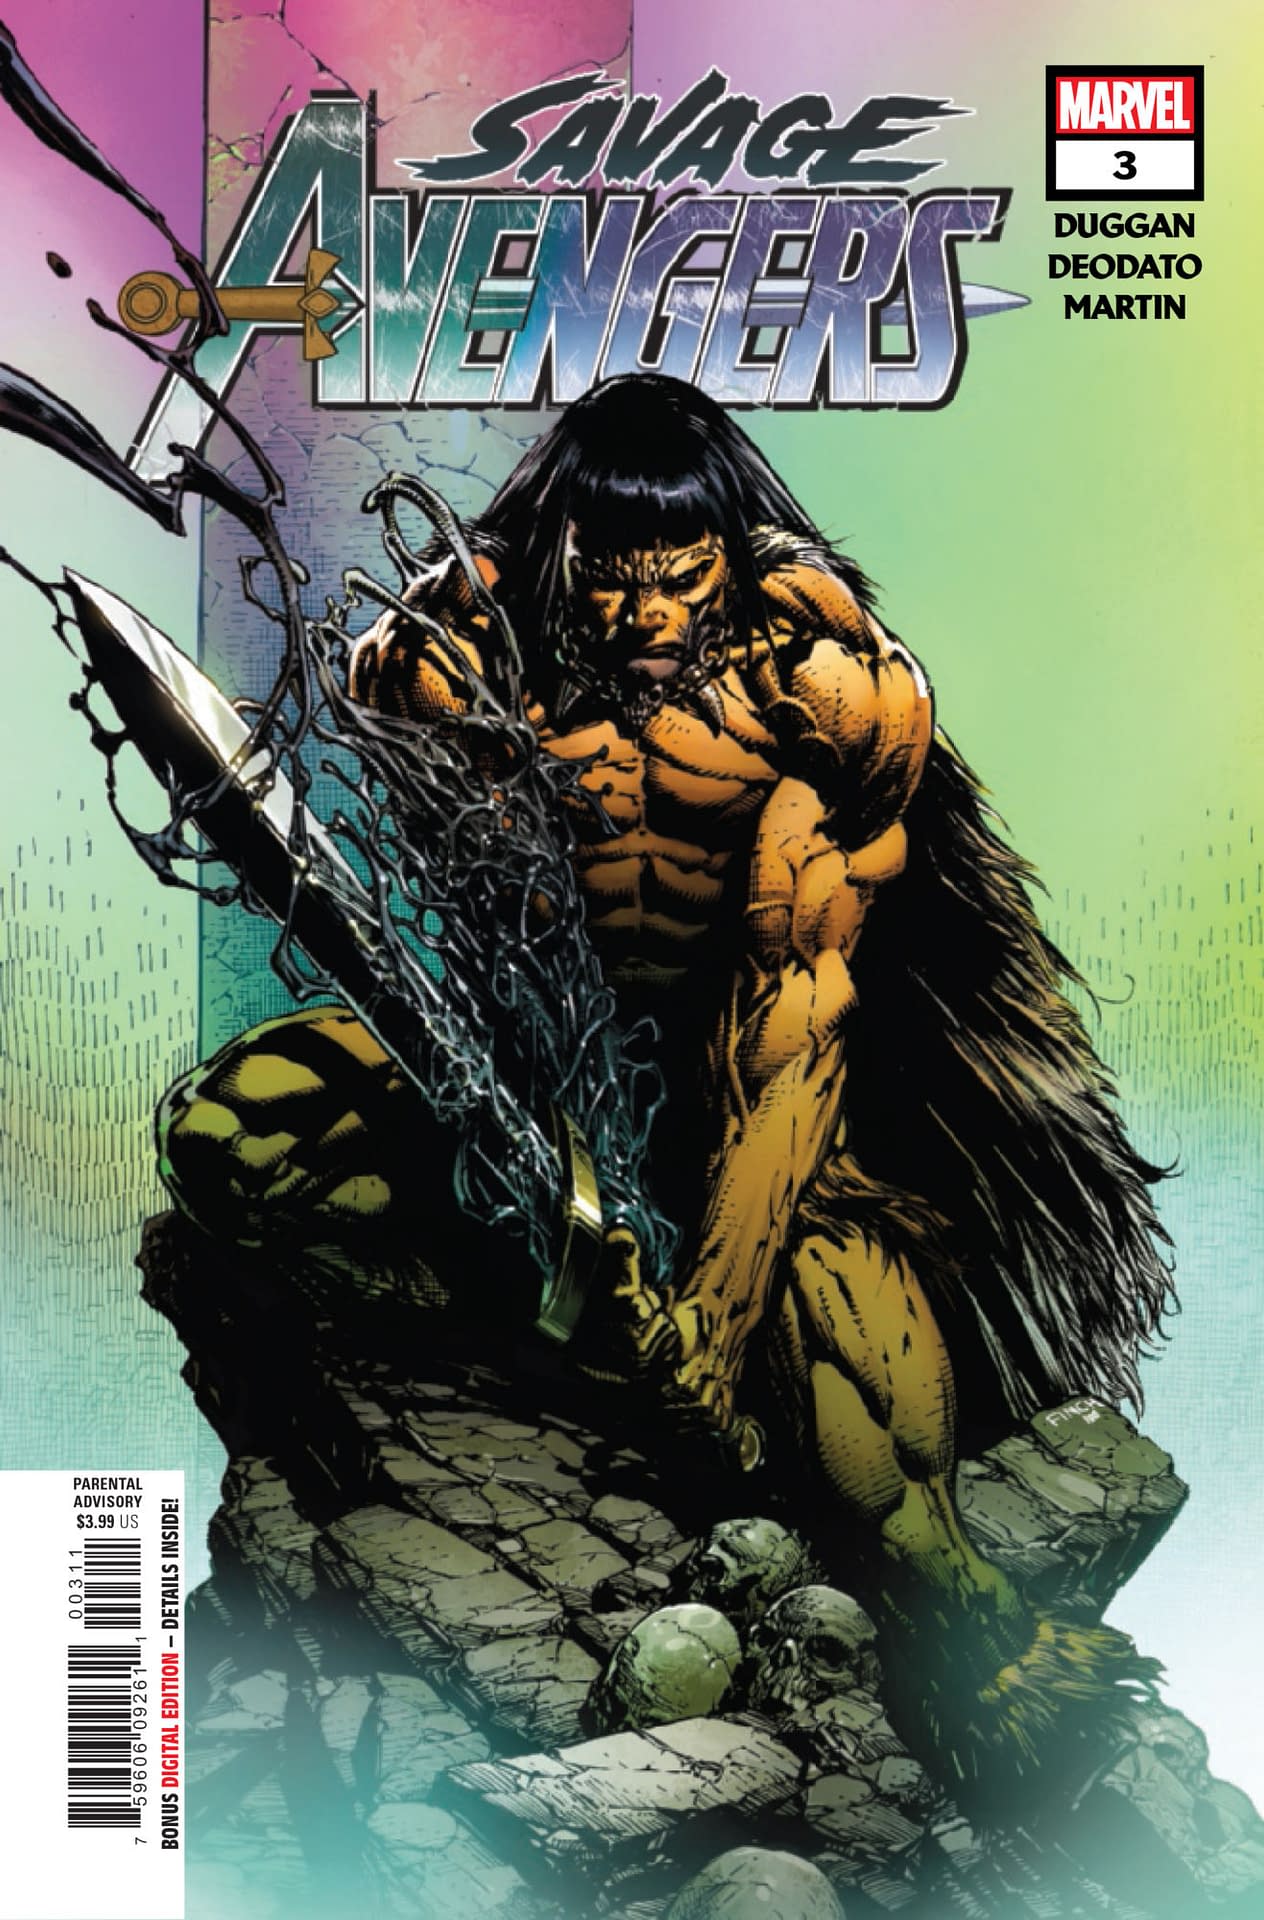 A Marvel Knights Team-Up for Savage Avengers #3 (Preview)